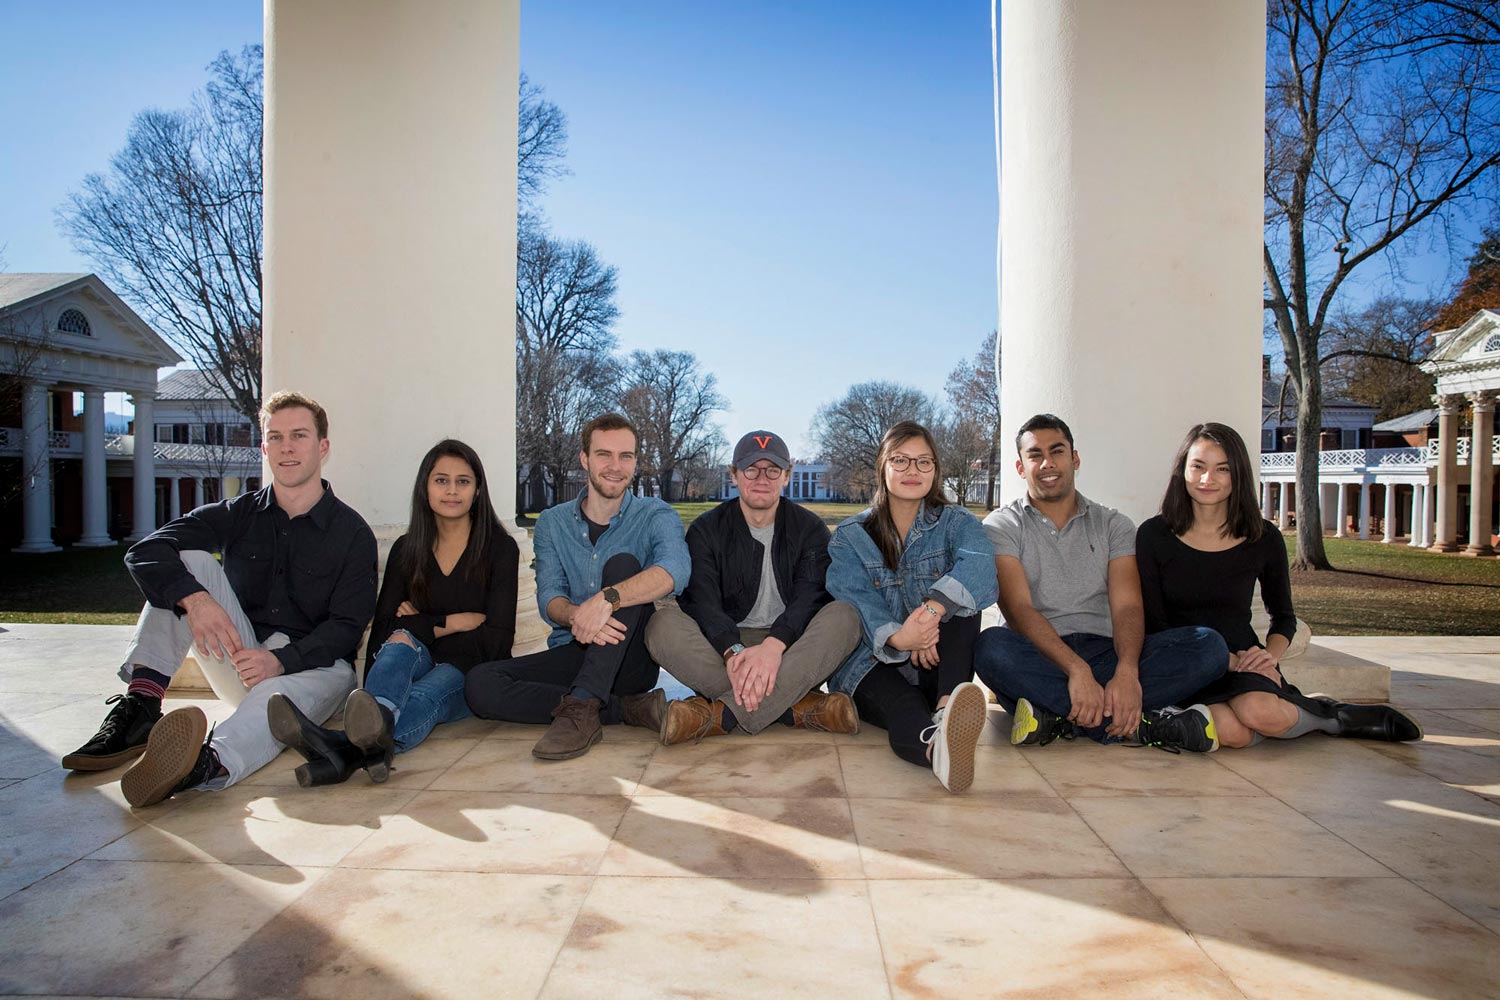 Charlie Tolleson, Nina Satasiya, Tyler Chartier, Andy Page, Anna Kuno, Yash Tekriwal and Amy McMillen sit together on the floor in front of the Rotunda entrance